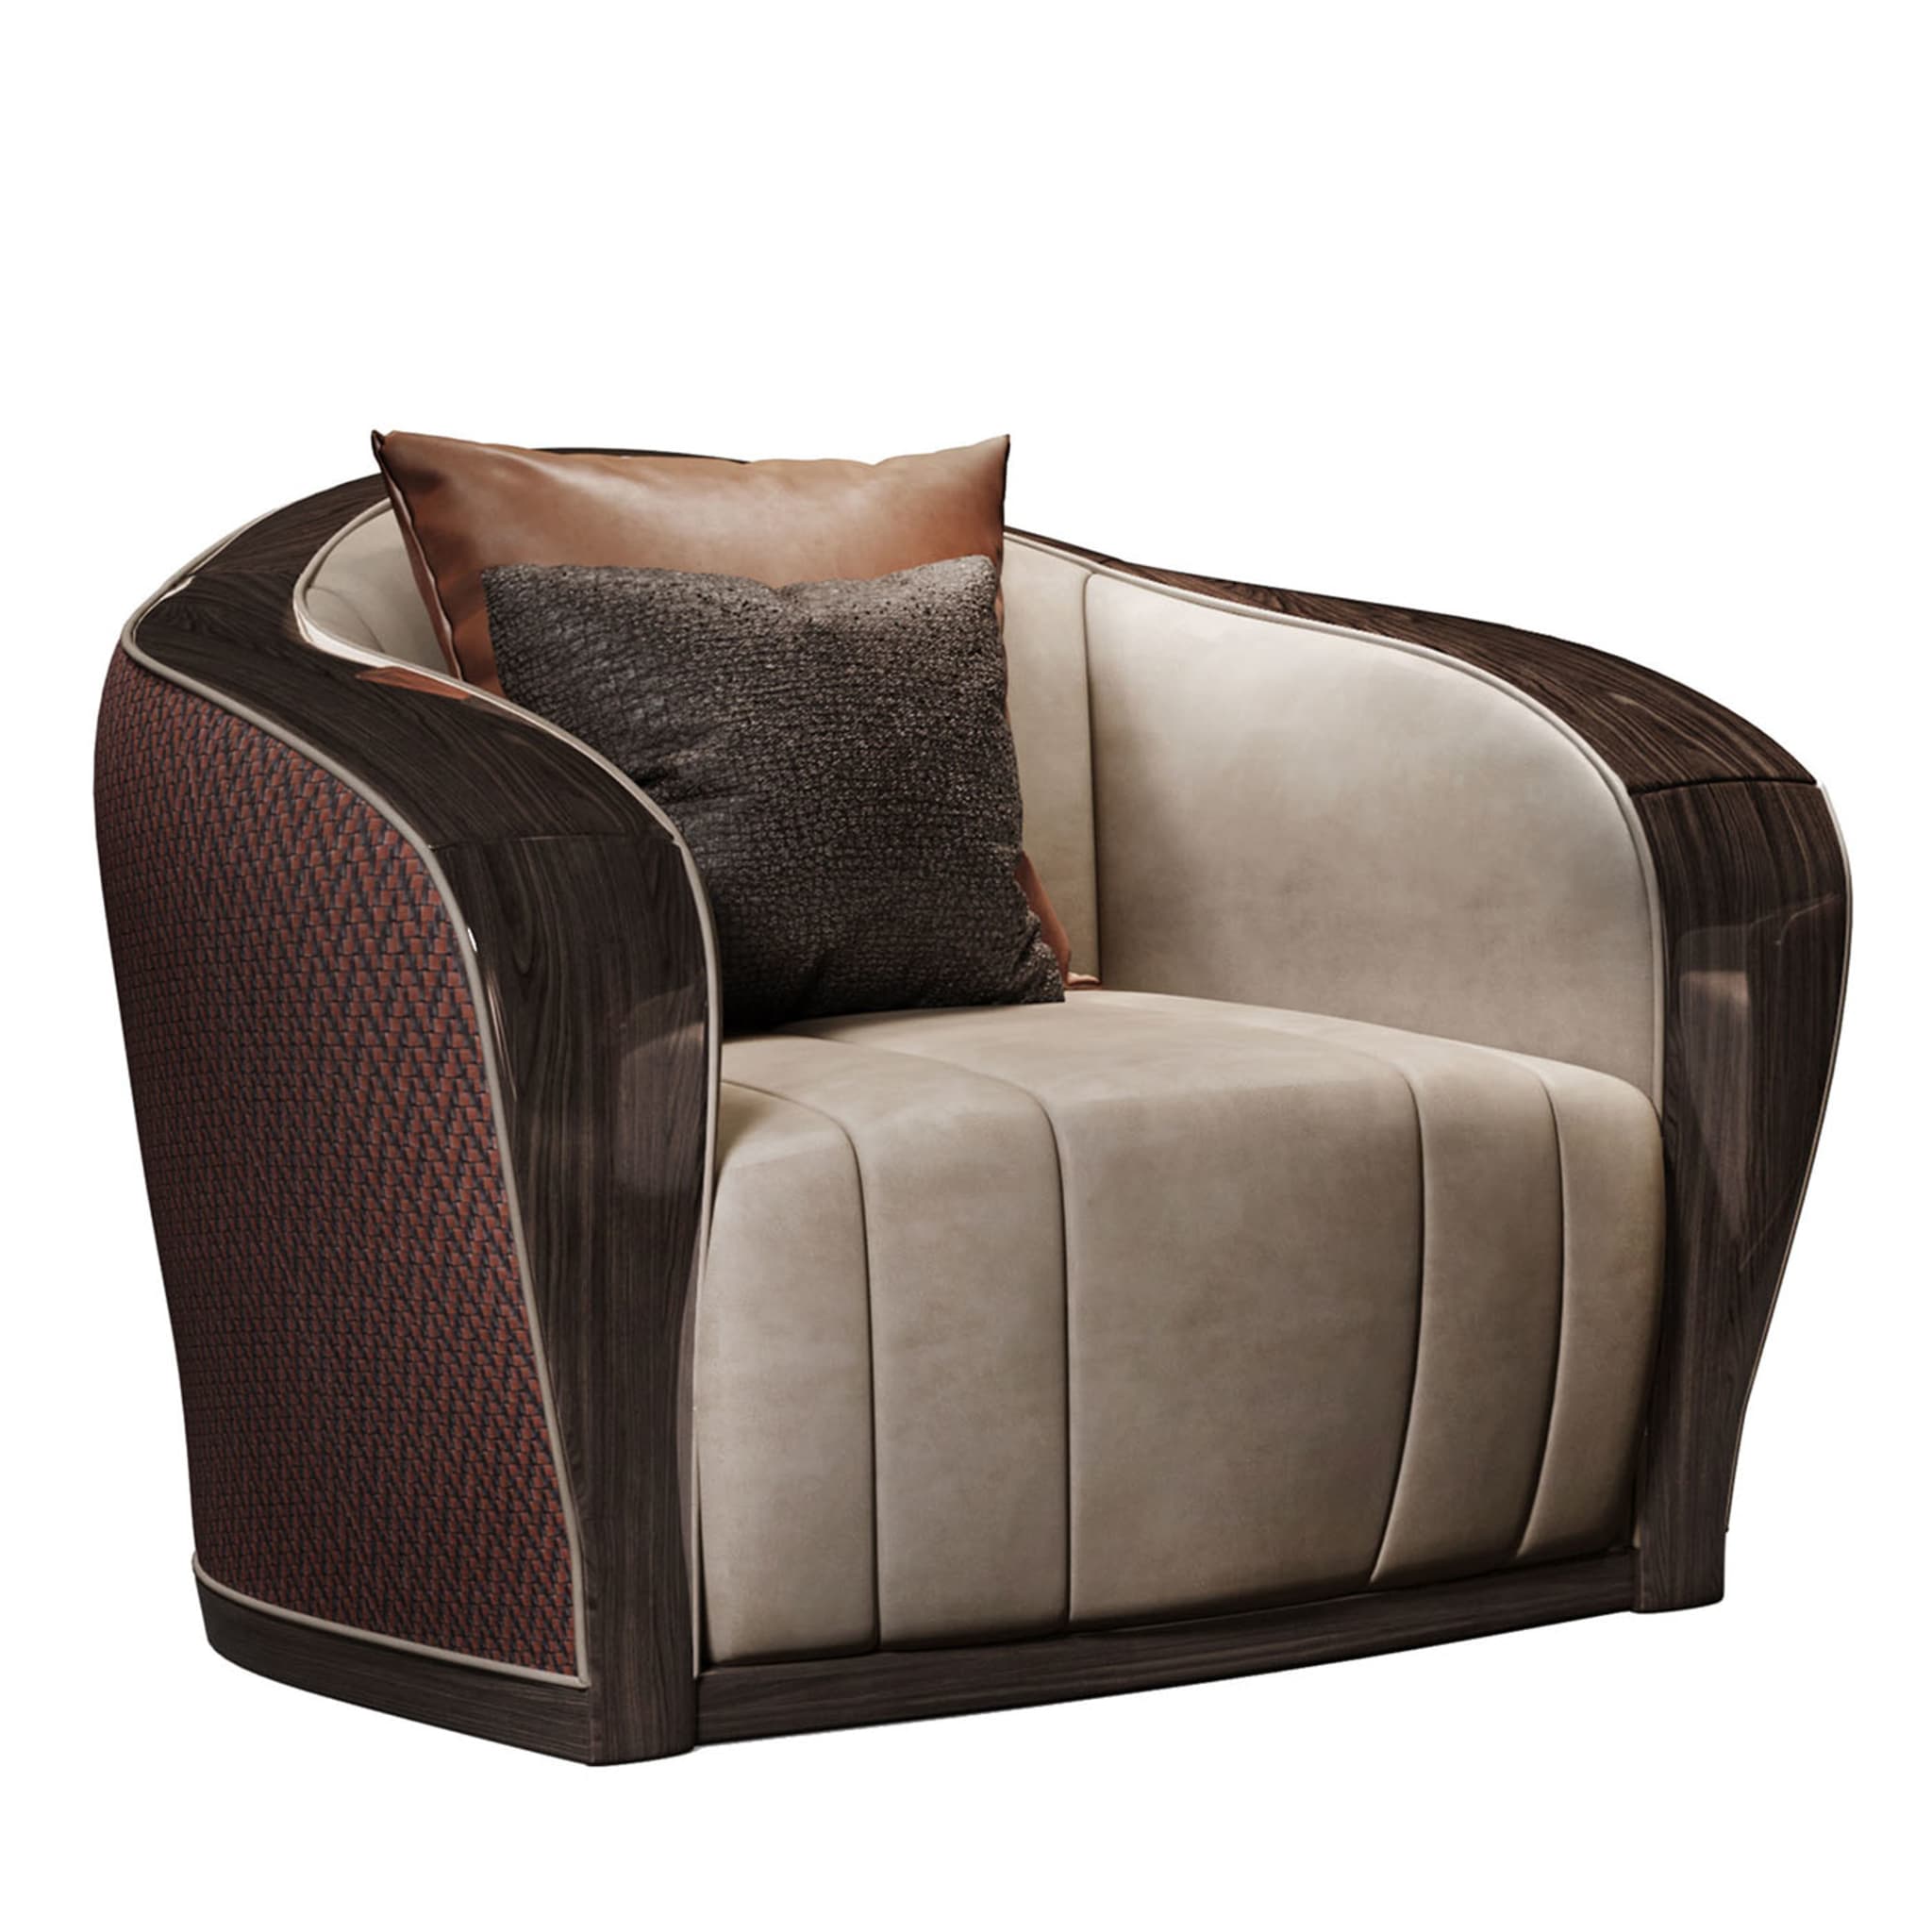 Castagno Channeled Brown-Leather Armchair - Main view